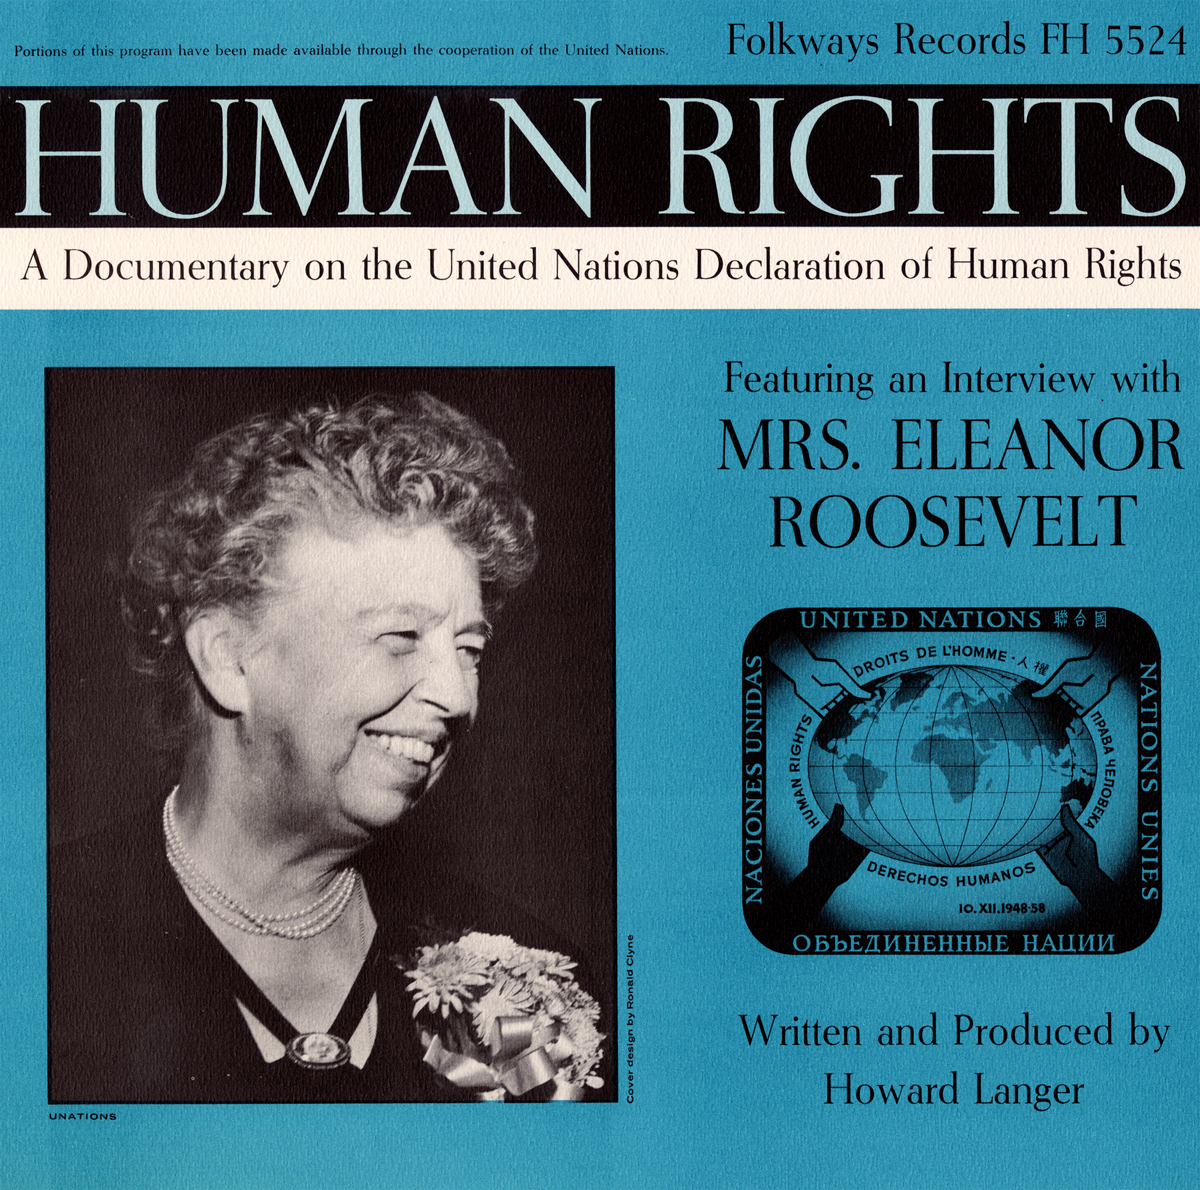 HUMAN RIGHTS: UNITED NATIONS DECLARATION